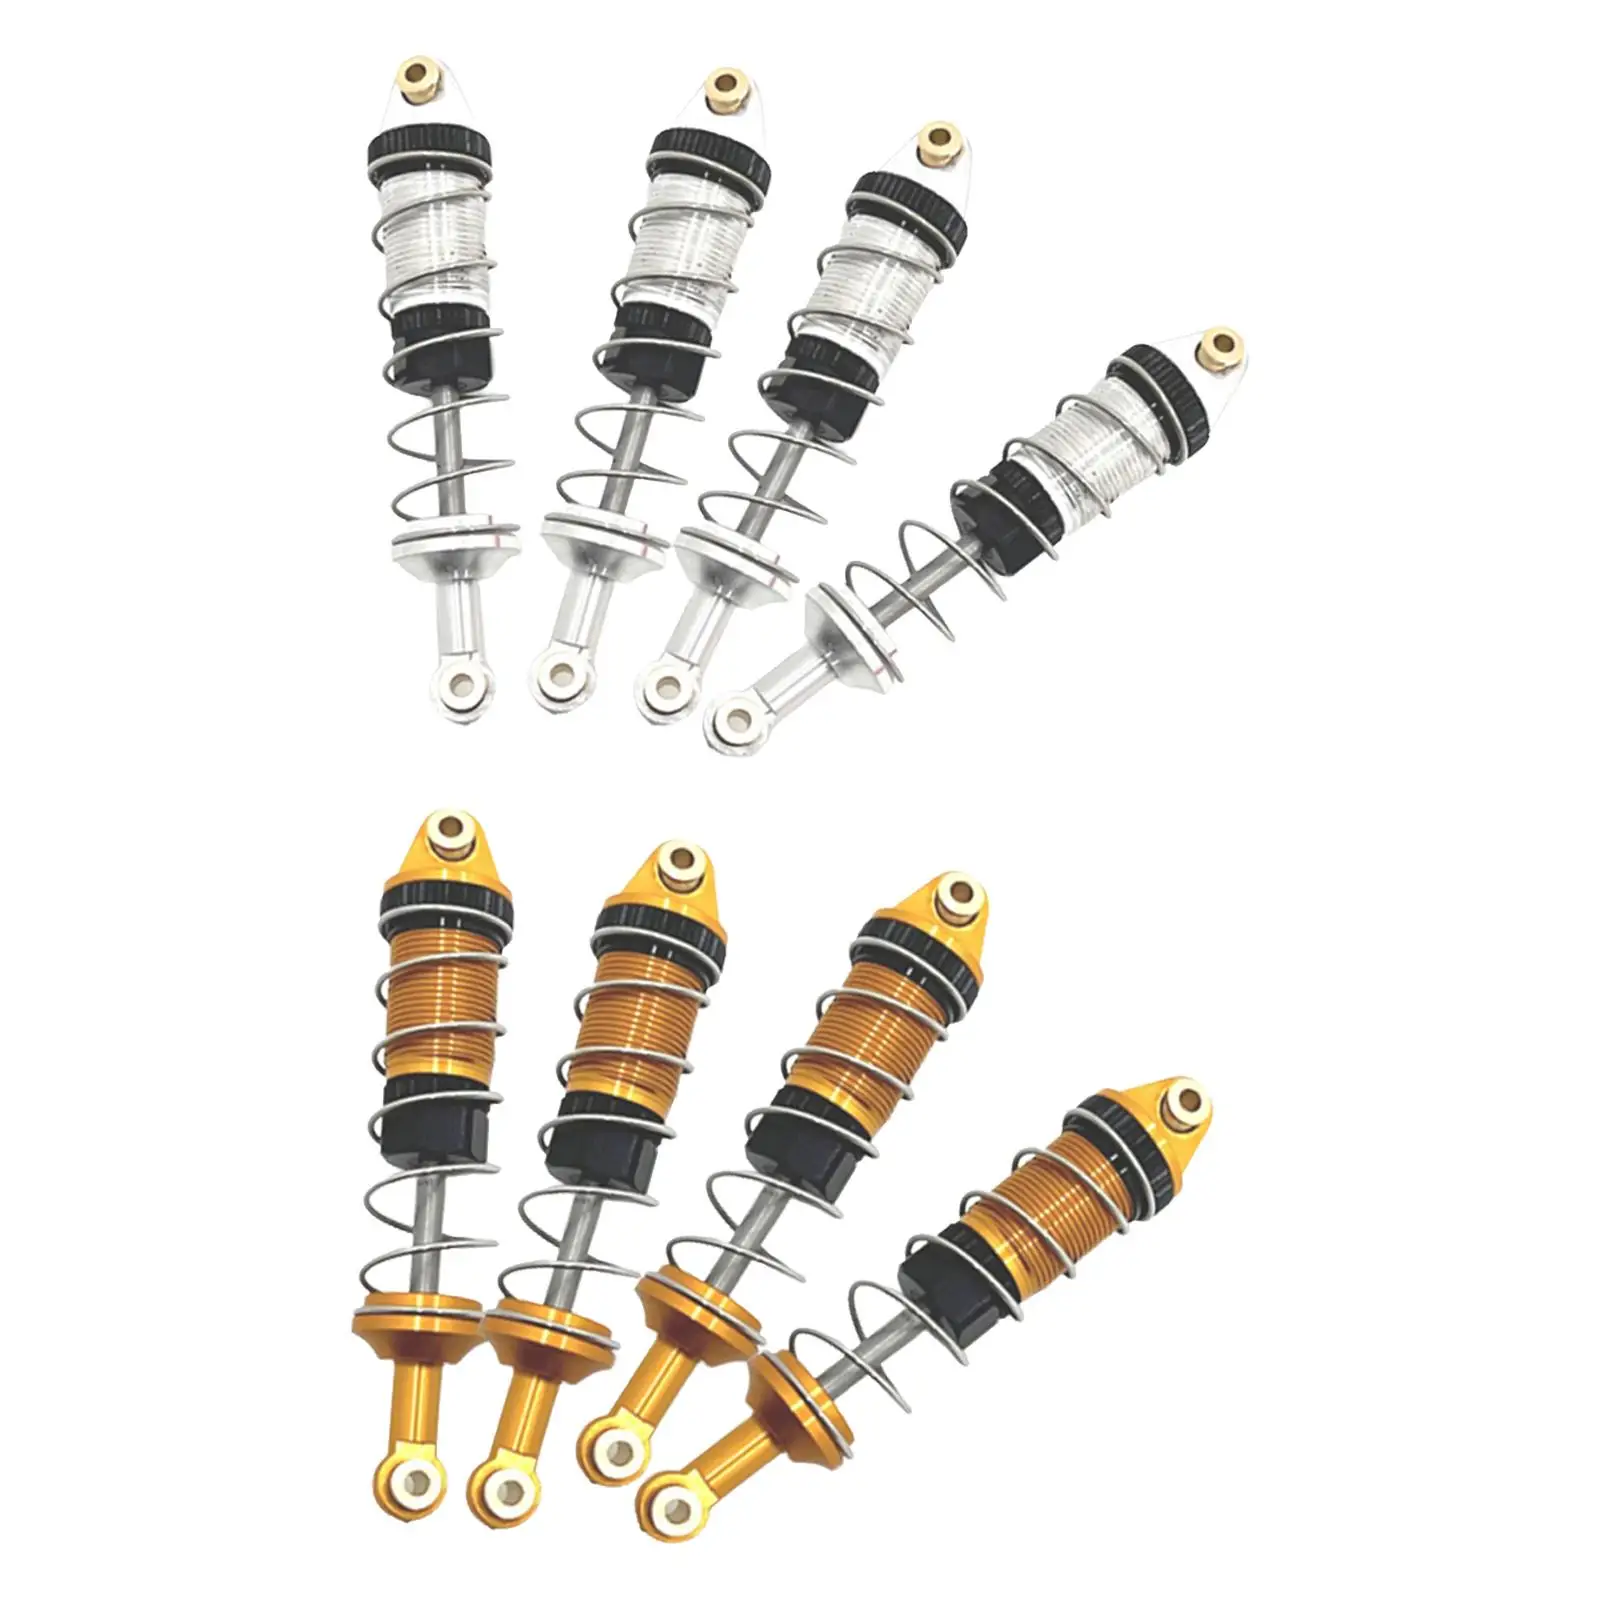 4x RC Shock Absorber Front and Rear RC Shocks Damper 1/16 Scale Spare Parts for 16207 16209 Model RC Hobby Car Trucks